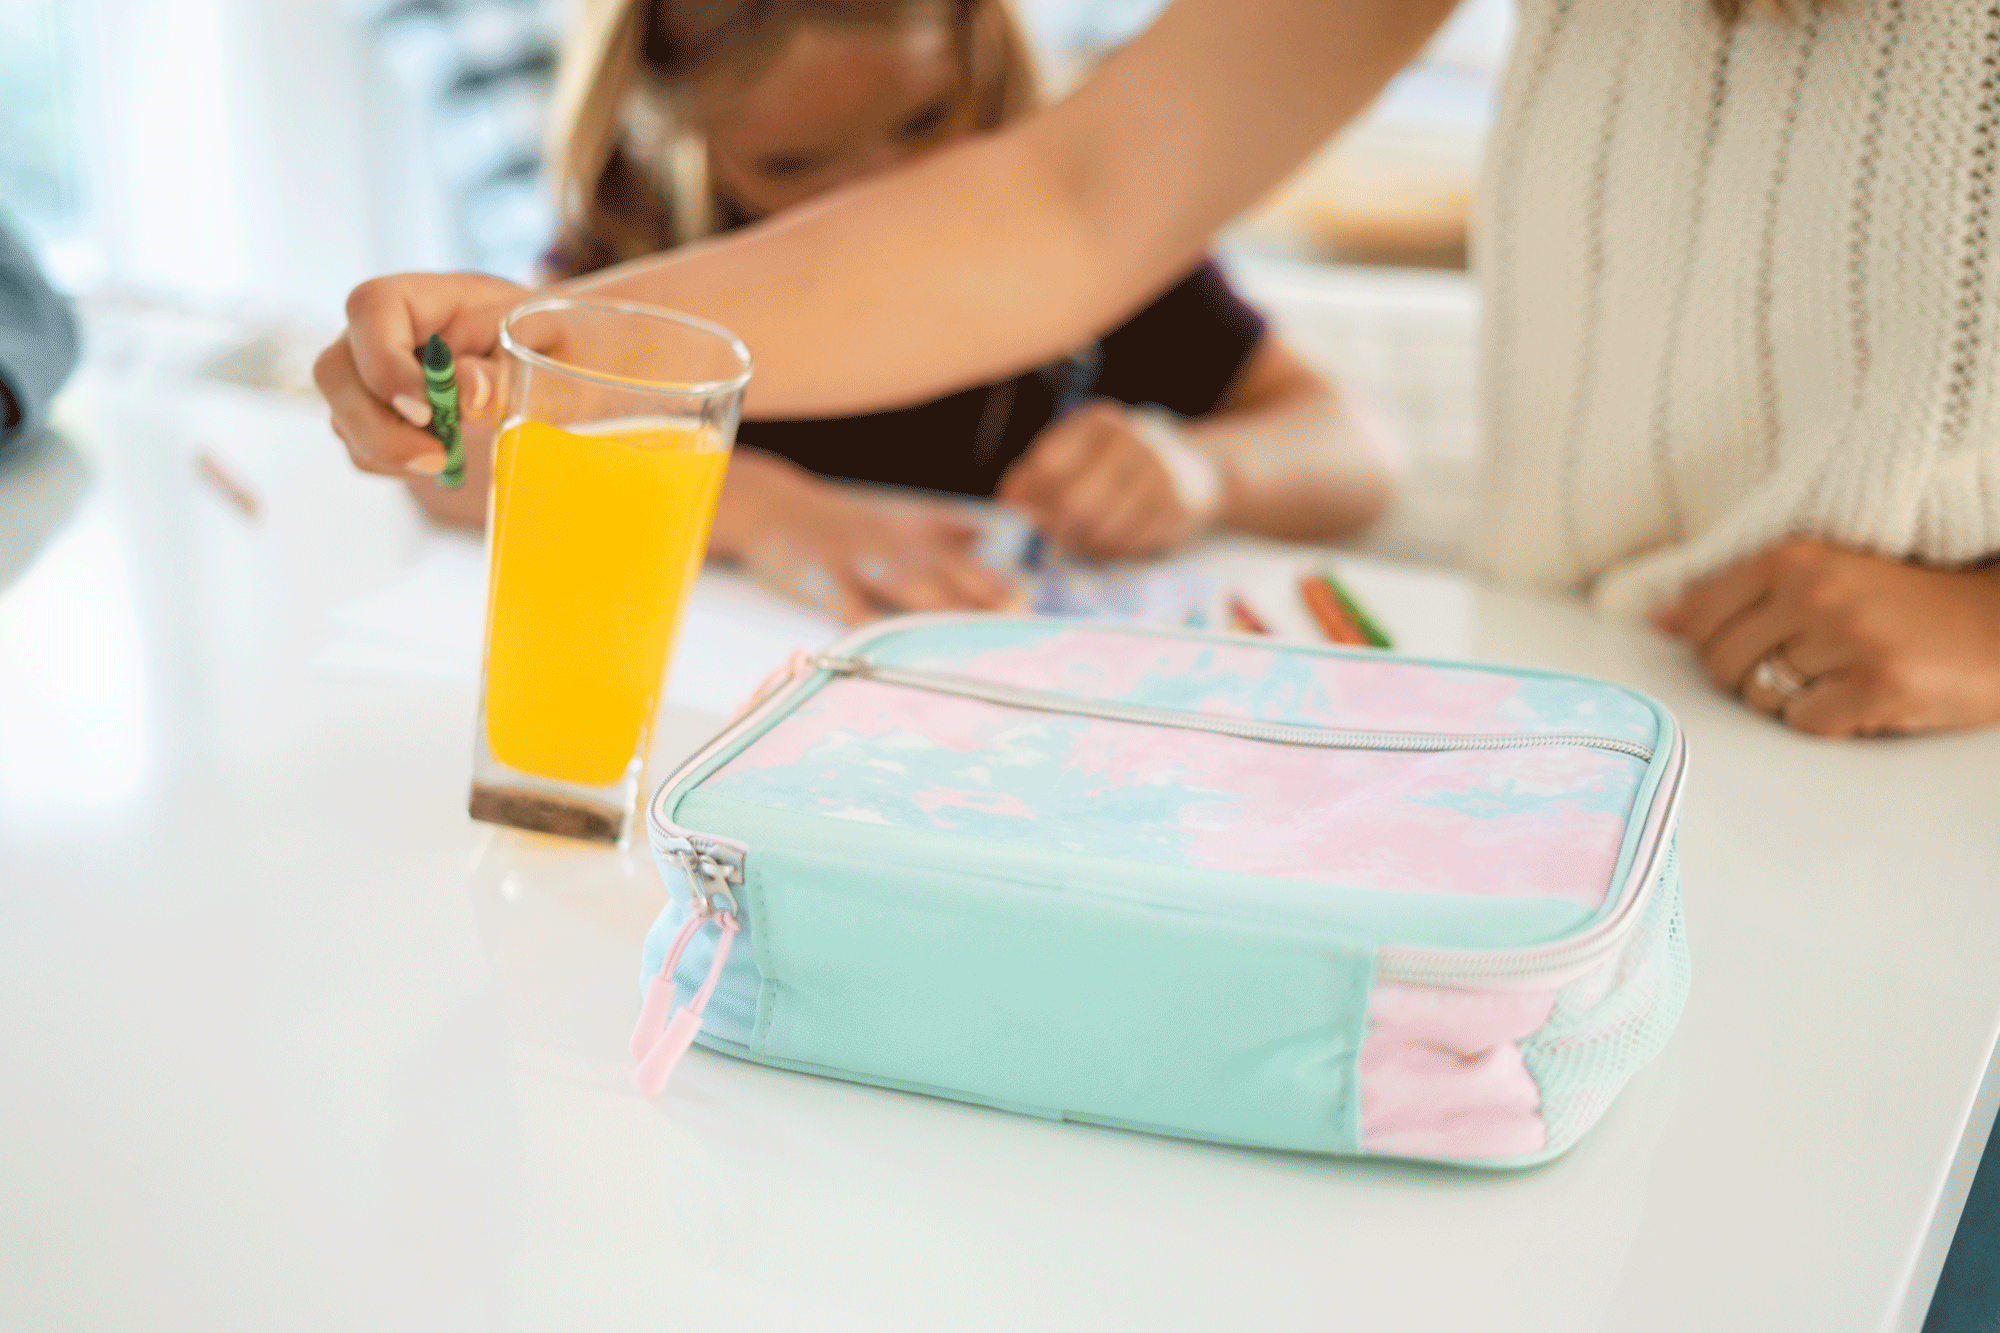 liquid beading up after mother spilling orange juice on daughters lunch box